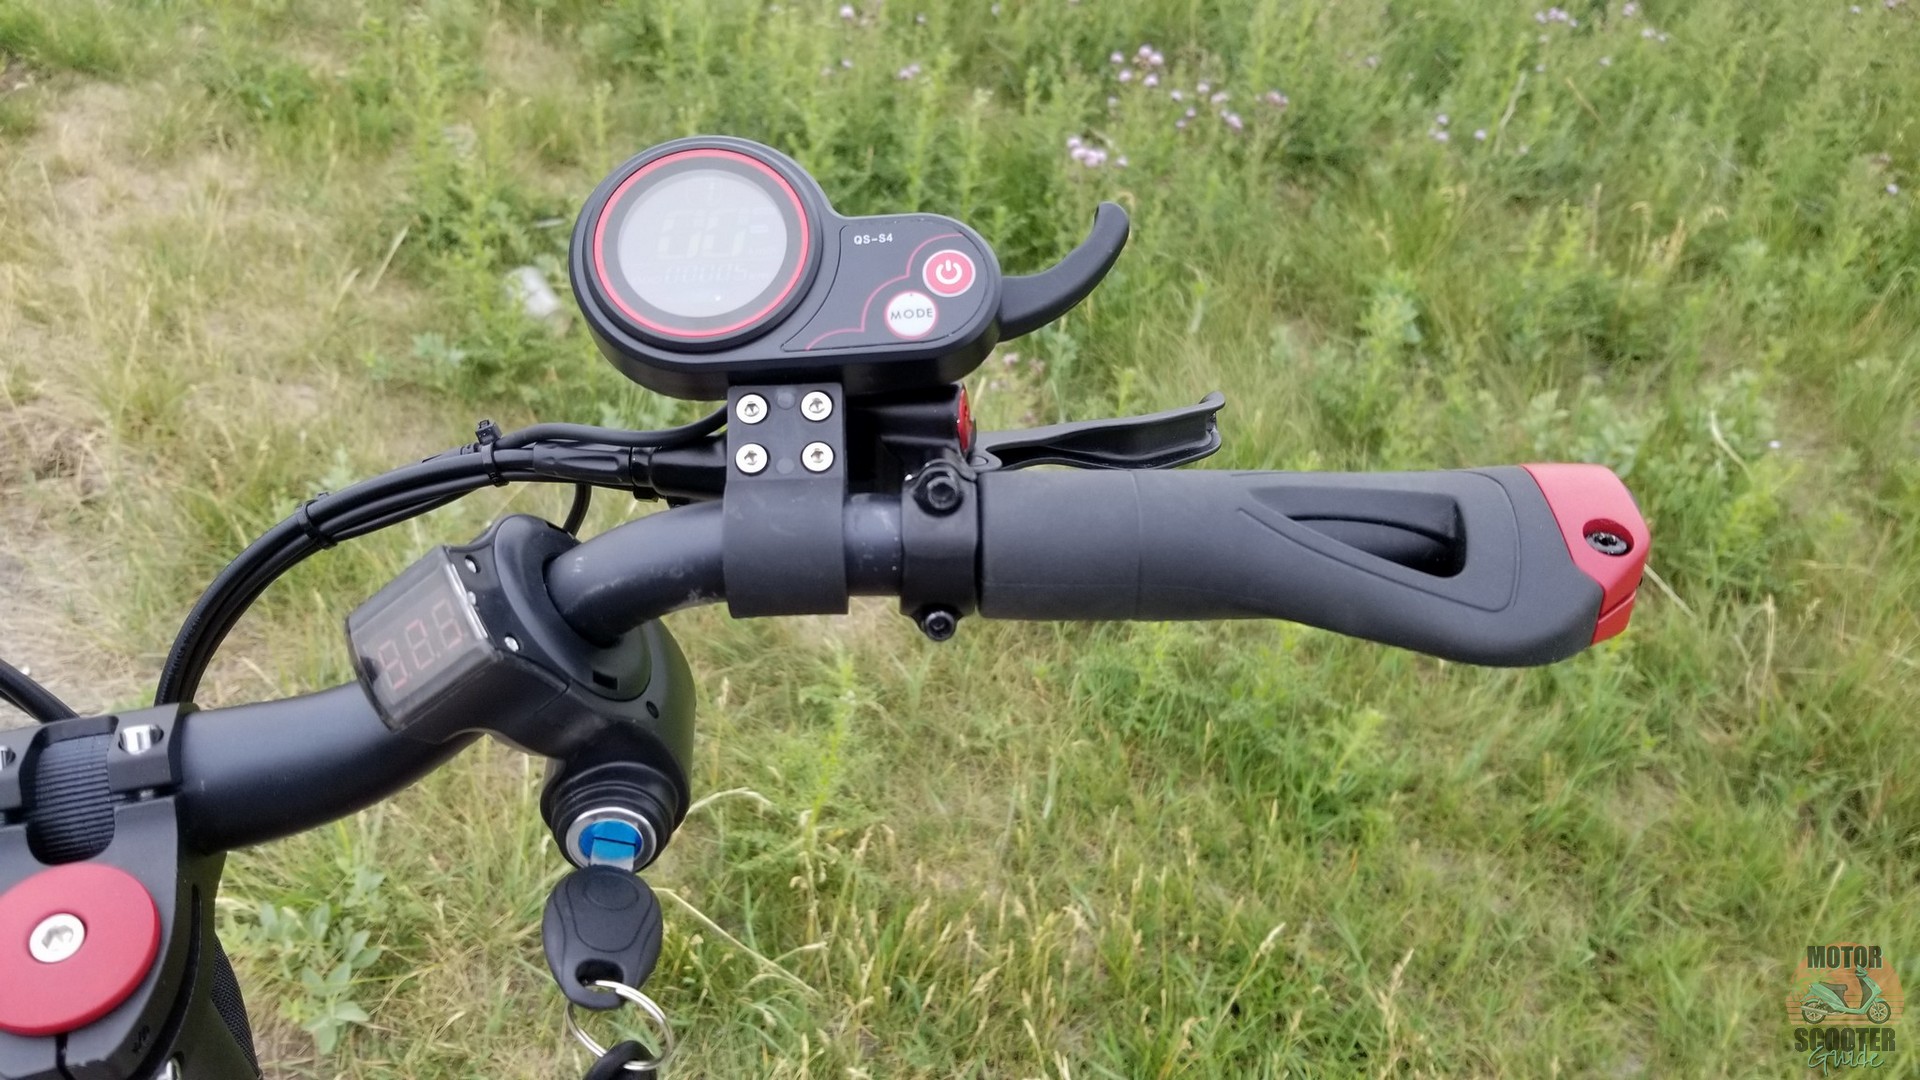 Right side of the handlebar showing limited space for both throttle and right-hand brake